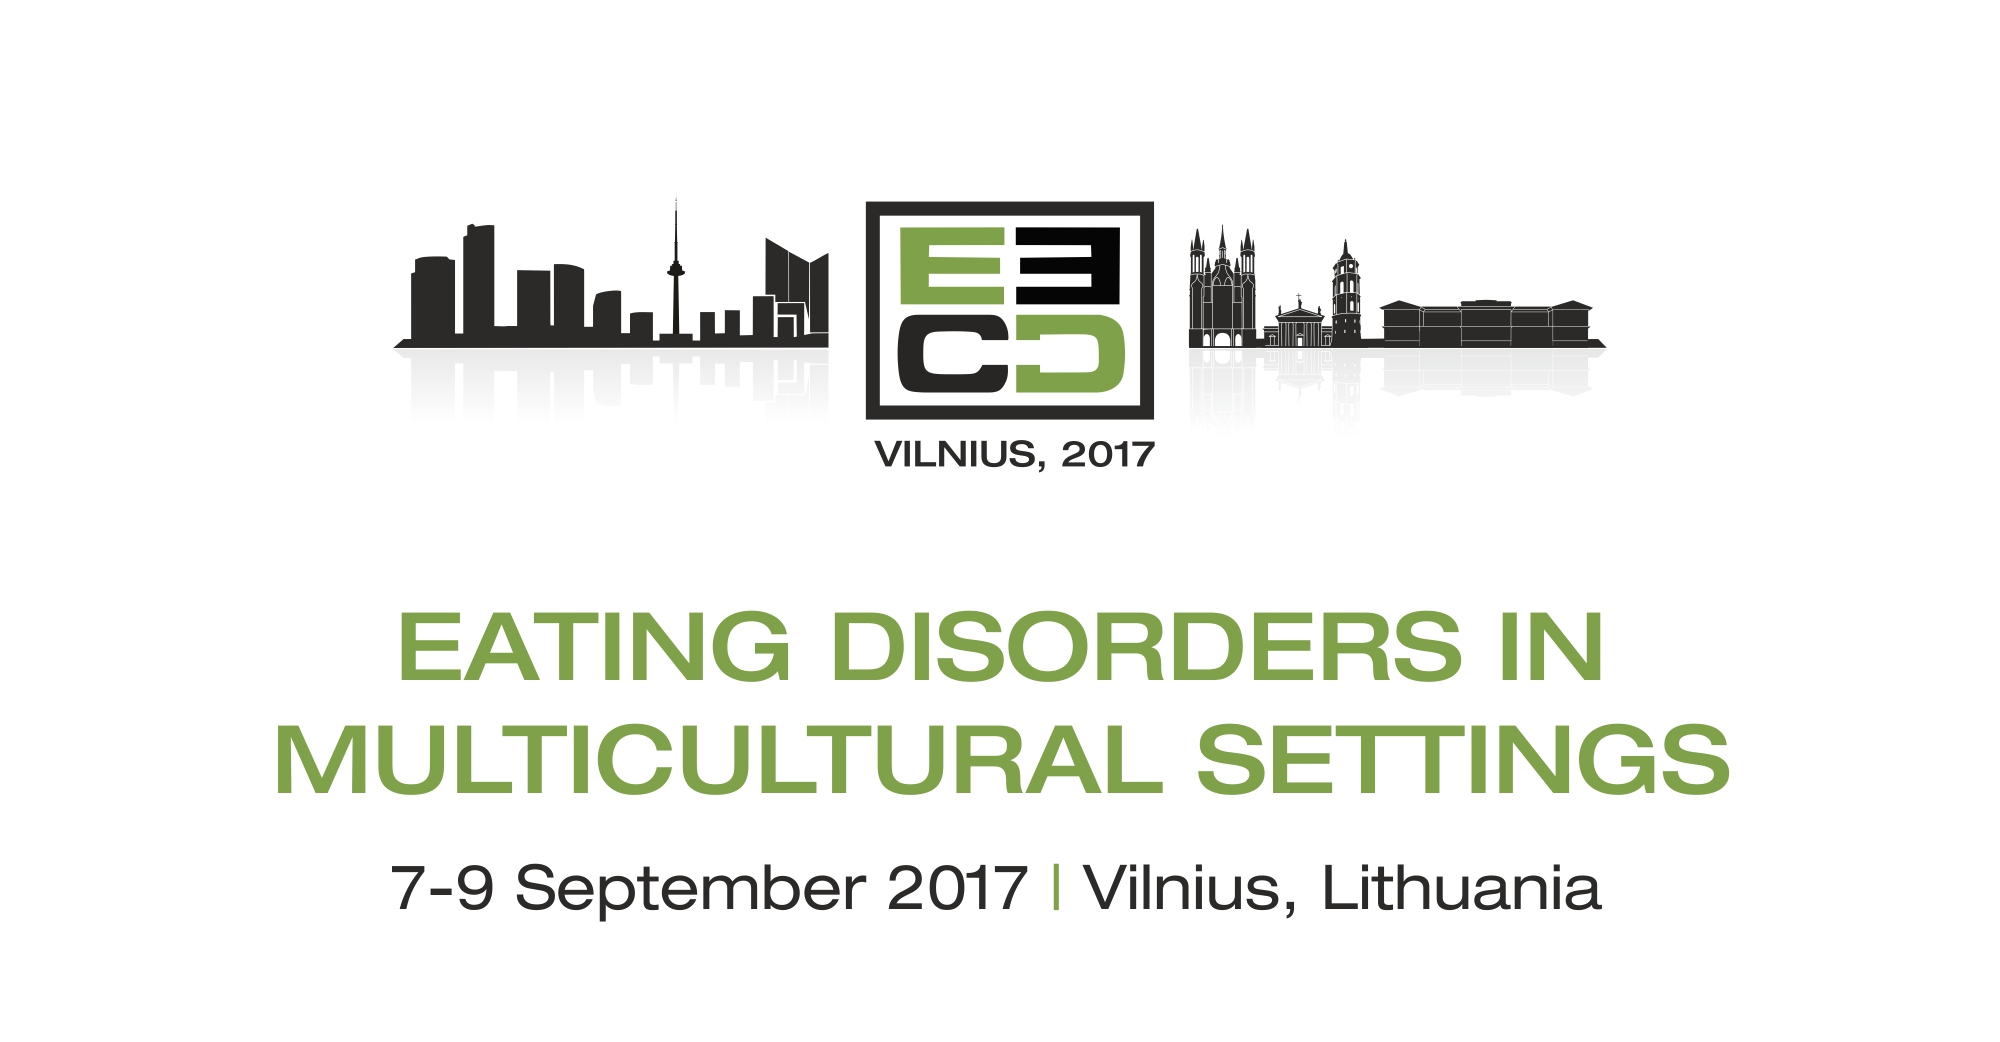 The main theme of the conference is Eating Disorders in Multicultural Settings, a very important issue in a multi-ethnic and globalized world where communities are increasingly diverse and as a result professionals are challenged to take a wide variety of socio-cultural aspects into account when providing state of the art treatment.